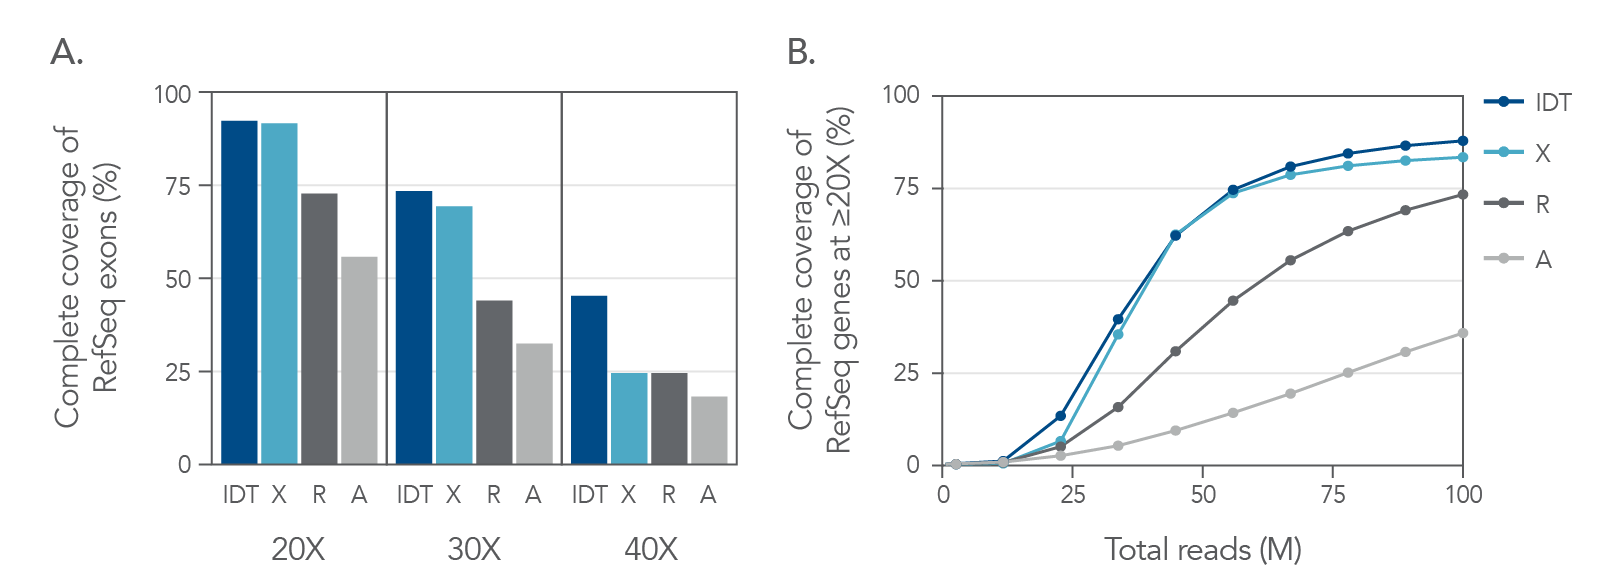 Complete coverage of all RefSeq exons at 20X, 30X, and 40X read depths.